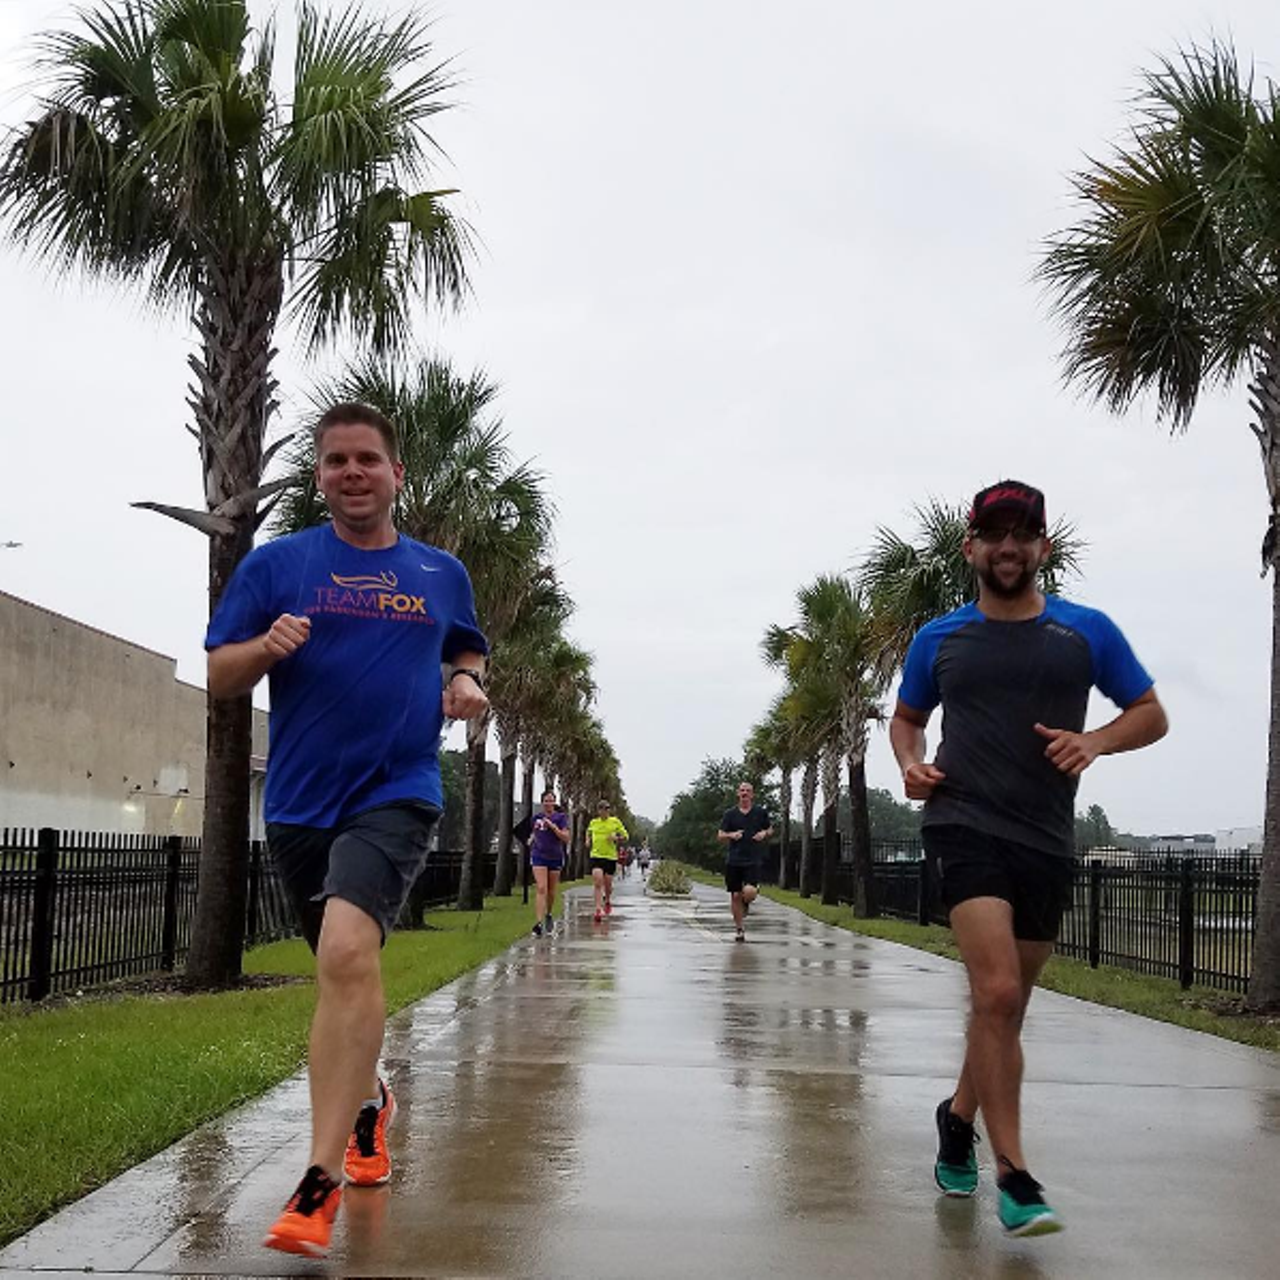  Join the Ten10 Run Club
1010 Virginia Drive, Orlando, 407-930-8993
Go running with the Ten10 Run Club each Tuesday at 6:30 p.m. Or if you don&#146;t want to run, you can walk with them too. No losses there, especially since it&#146;s free and you can work your way from walking to running as you join them week after week. If anything, you&#146;ll enjoy having a beer afterward to congratulate yourself for working out. 
Photo via ten10runclub/Instagram